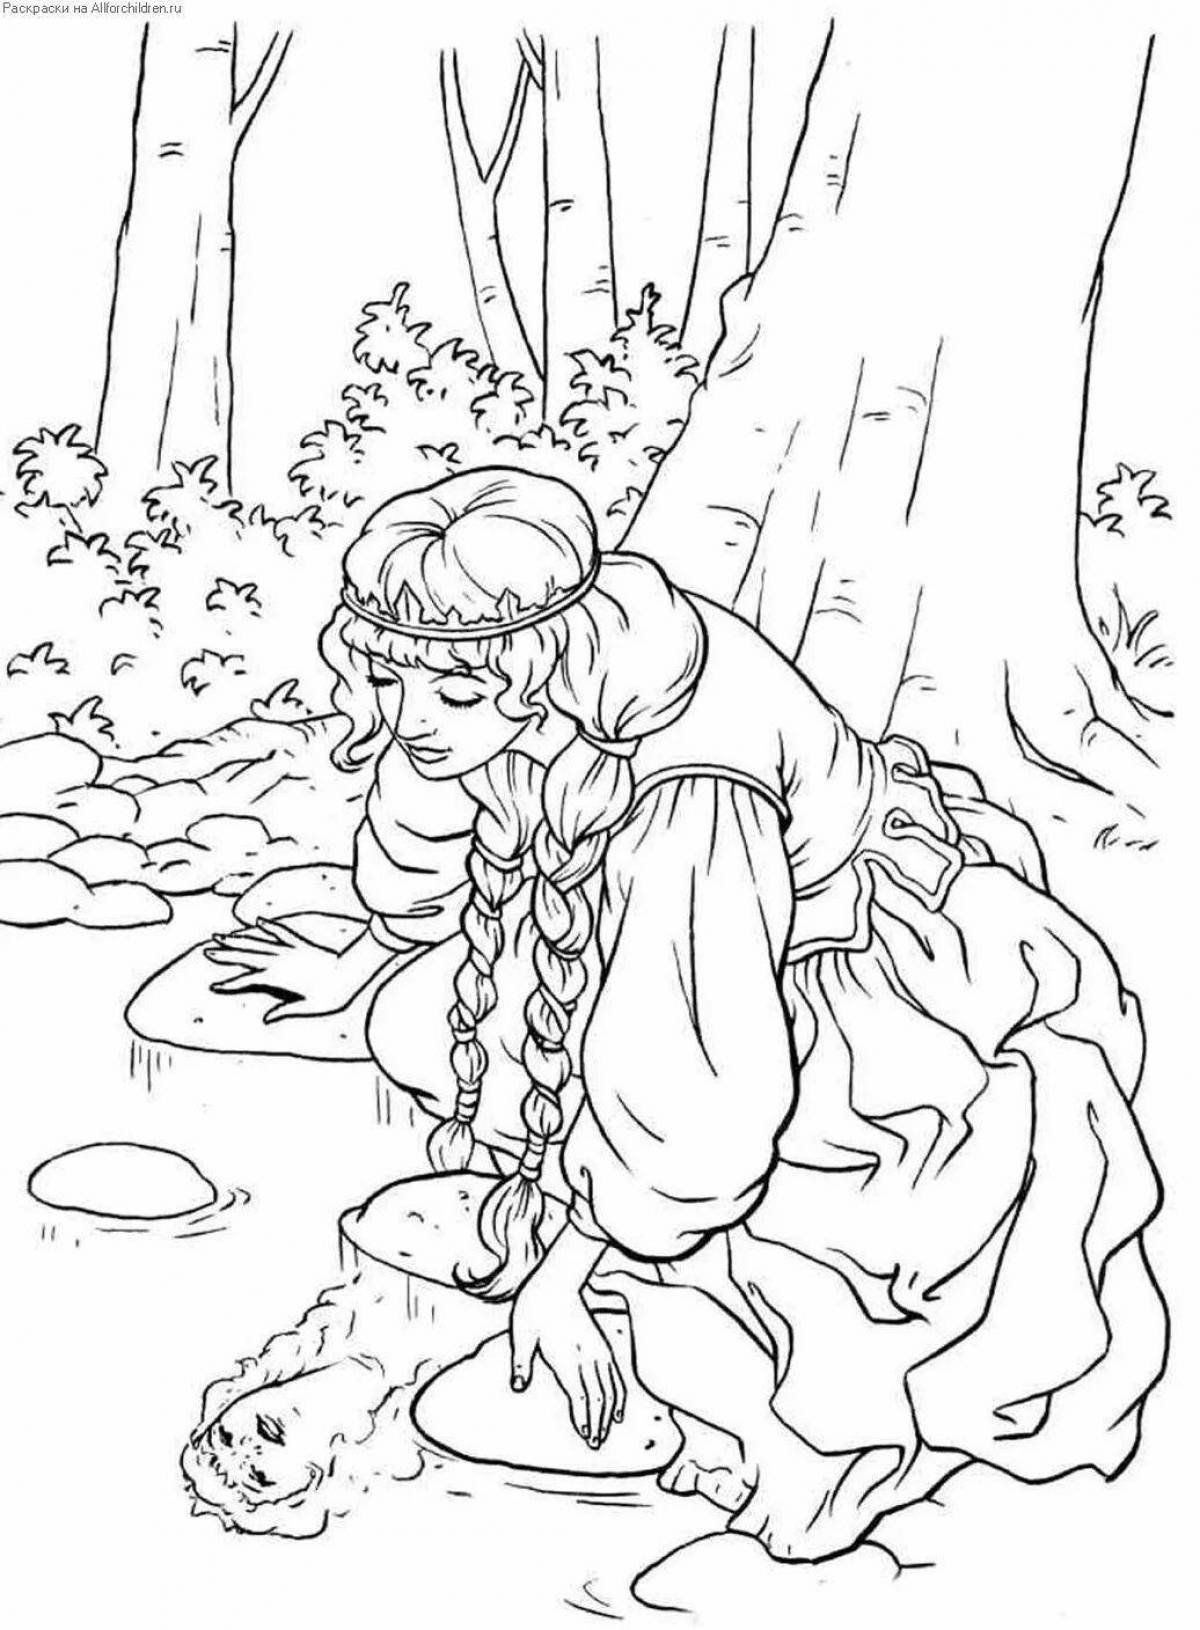 A fancy coloring book based on Bazhov's fairy tales